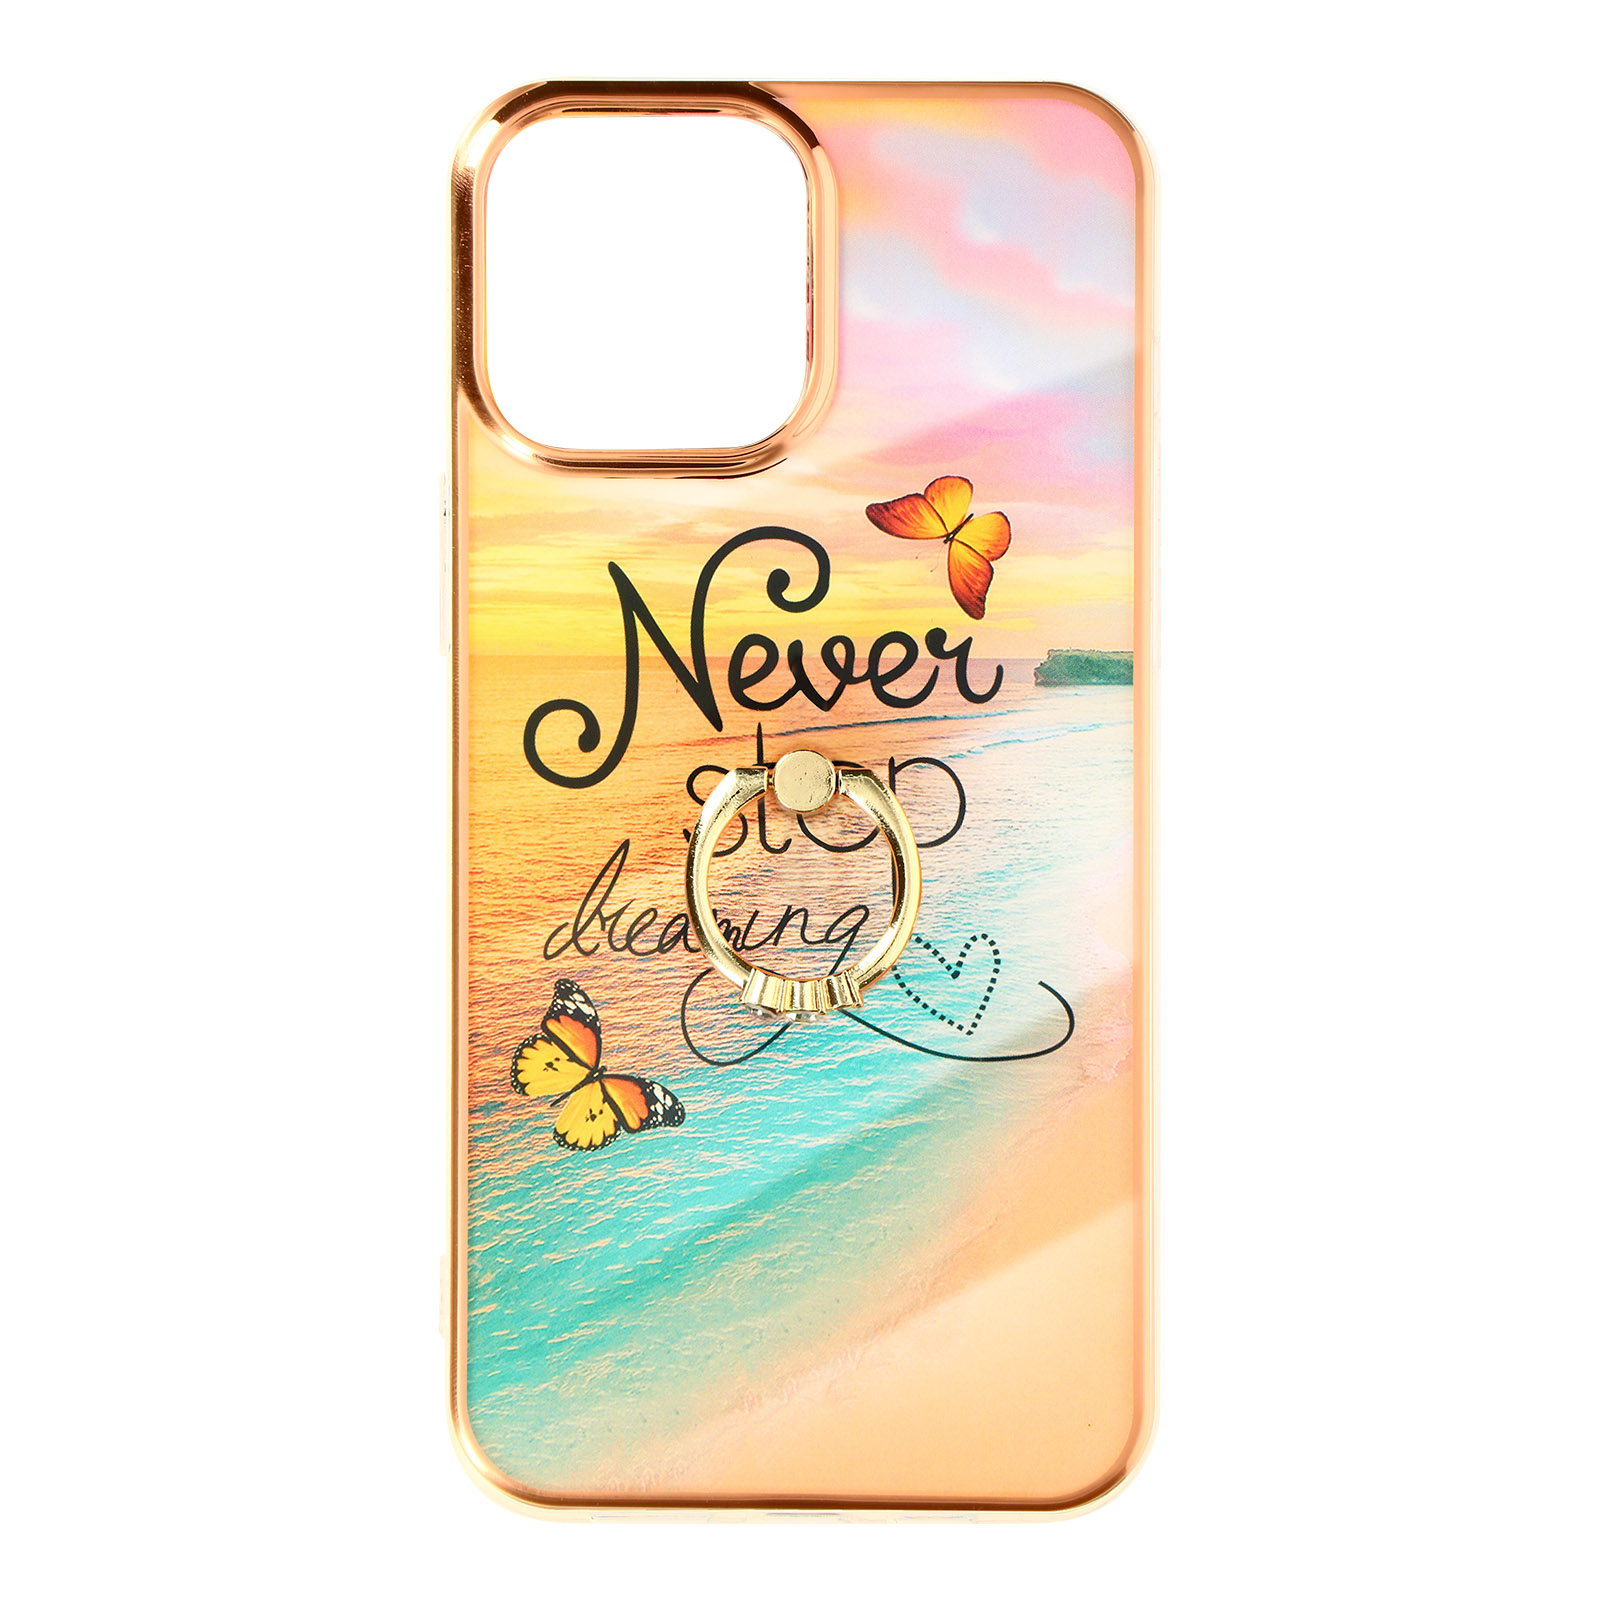 Pro Never Apple, Stop AVIZAR Series, 13 Orange Dreaming Max, iPhone Backcover,